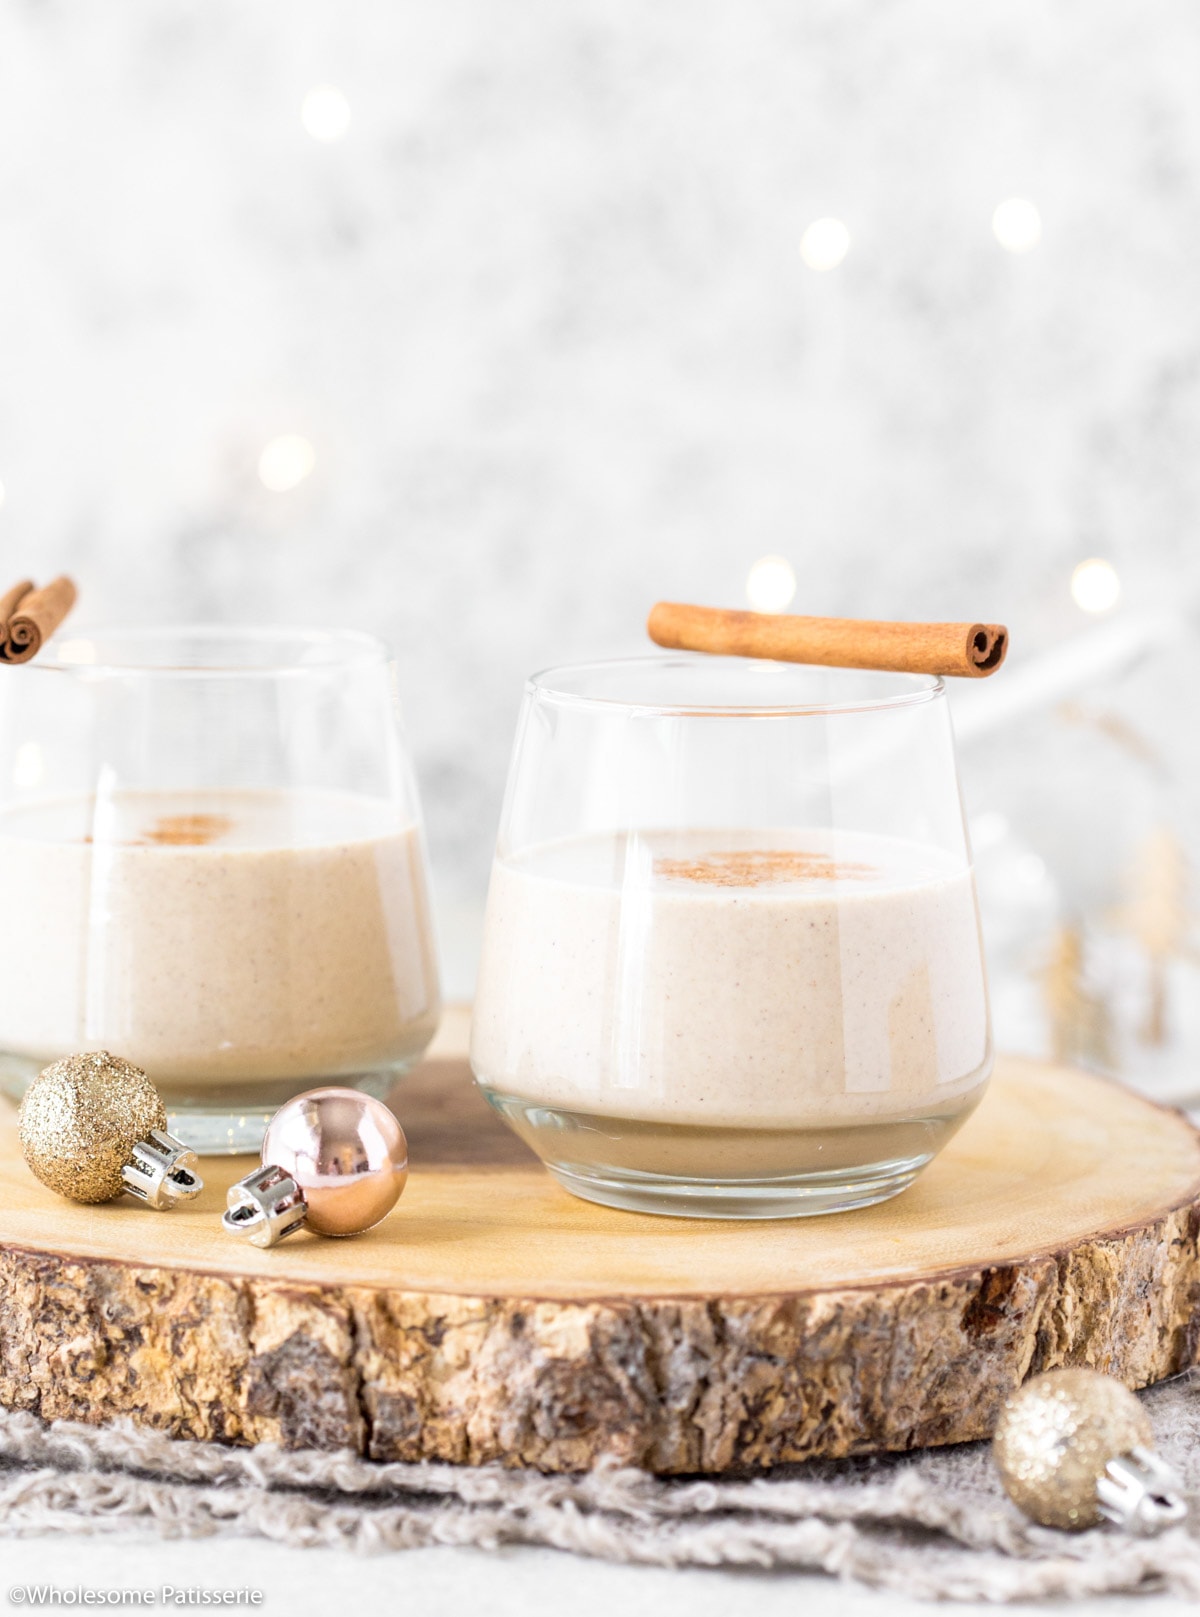 Easy eggnog in serving glasses with cinnamon sticks.